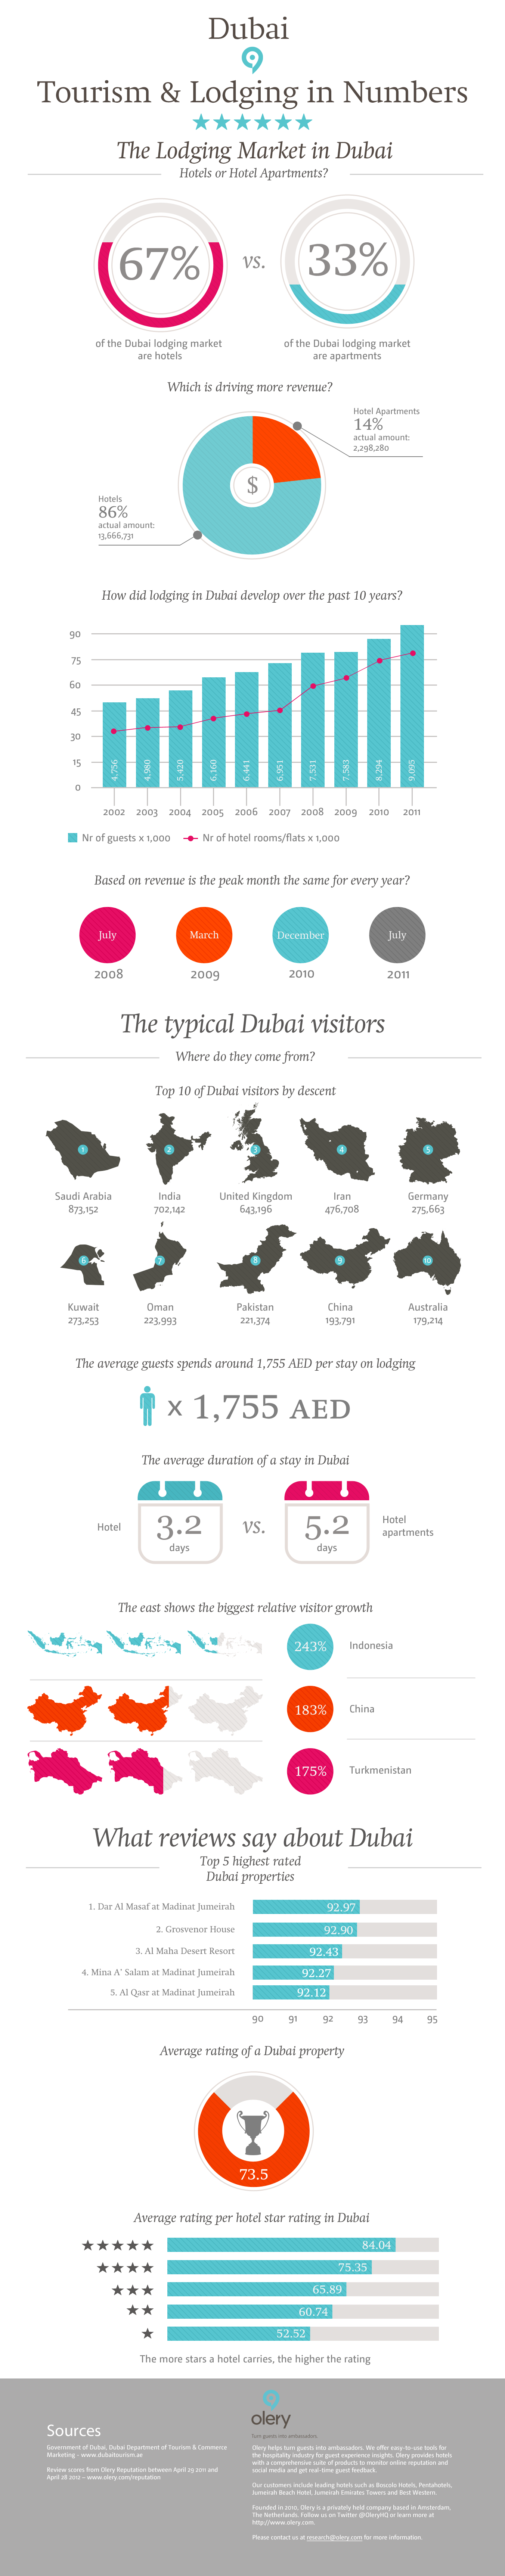 Dubai: Tourism & Lodging in numbers | Visual.ly